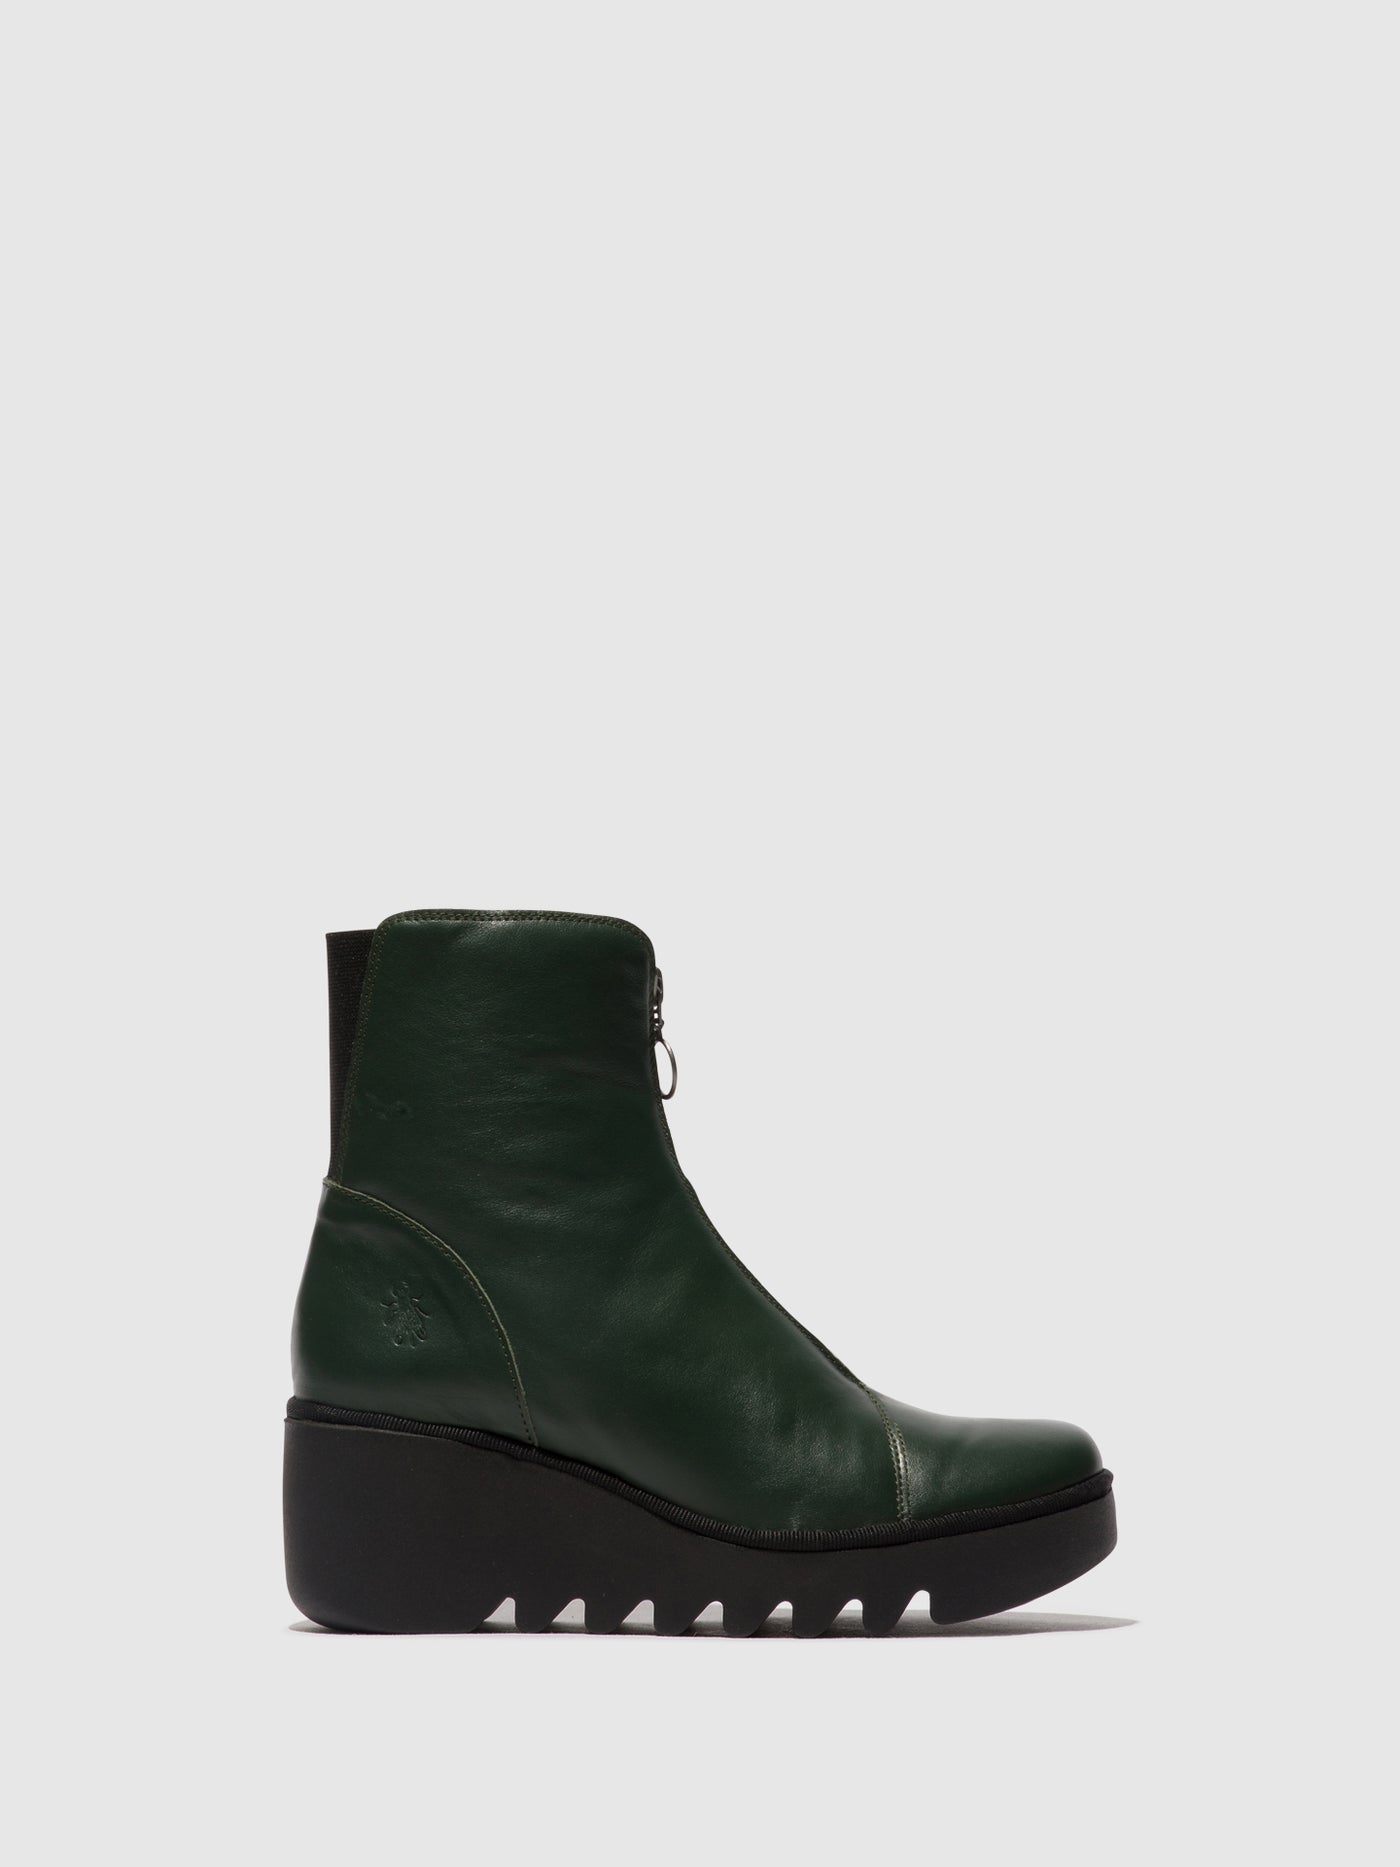 Zip Up Ankle Boots BOCE457FLY DK.GREEN